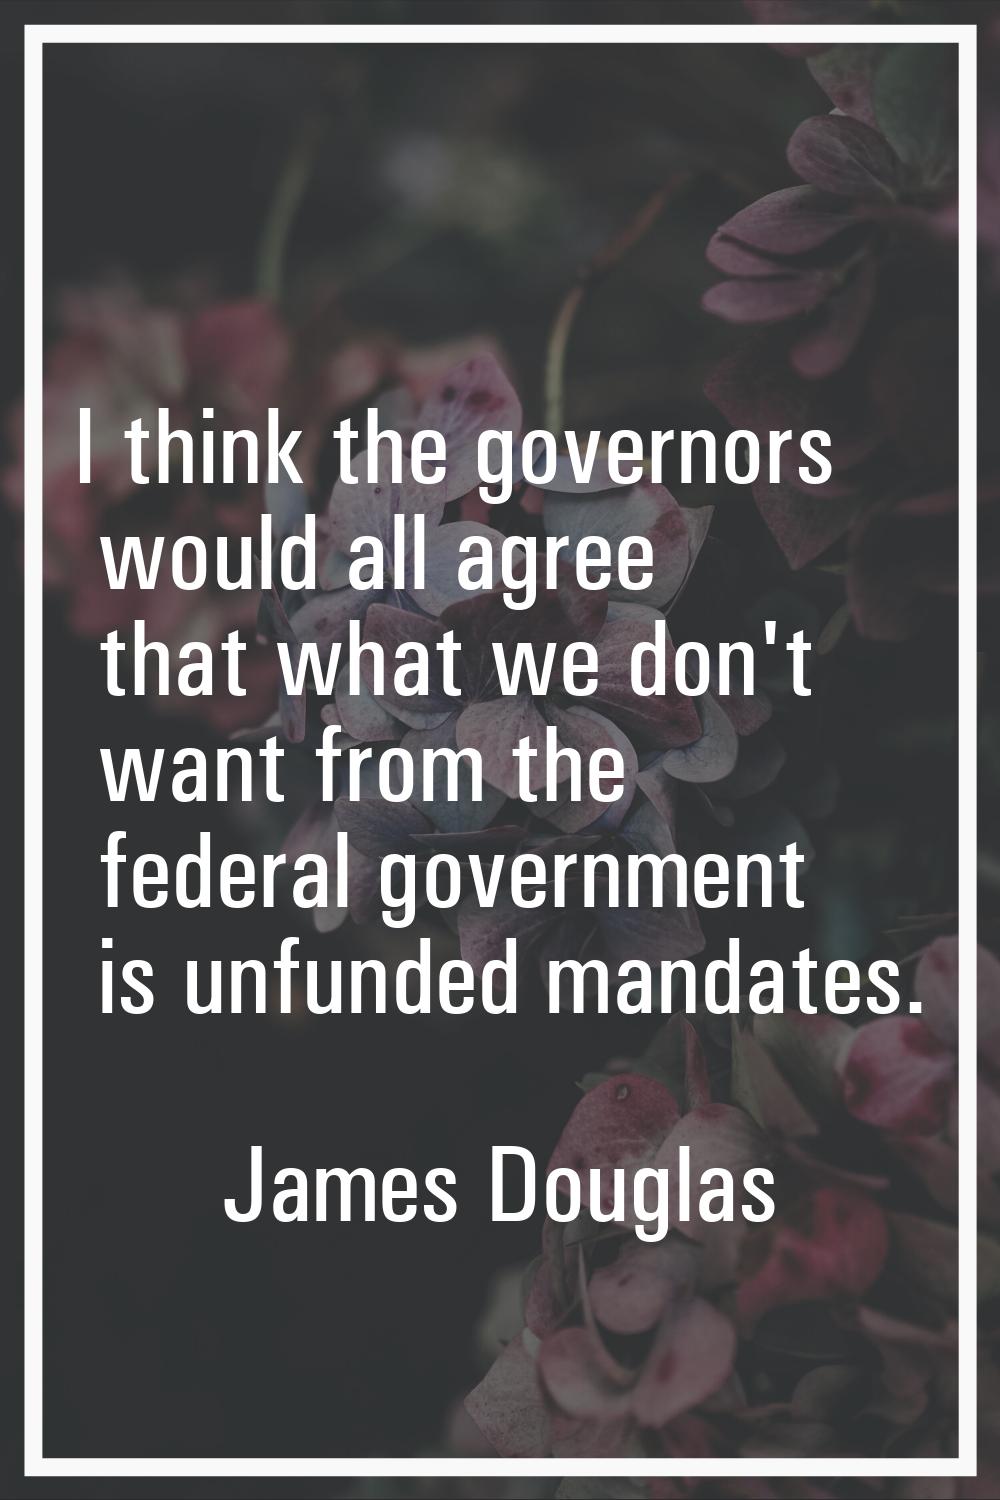 I think the governors would all agree that what we don't want from the federal government is unfund